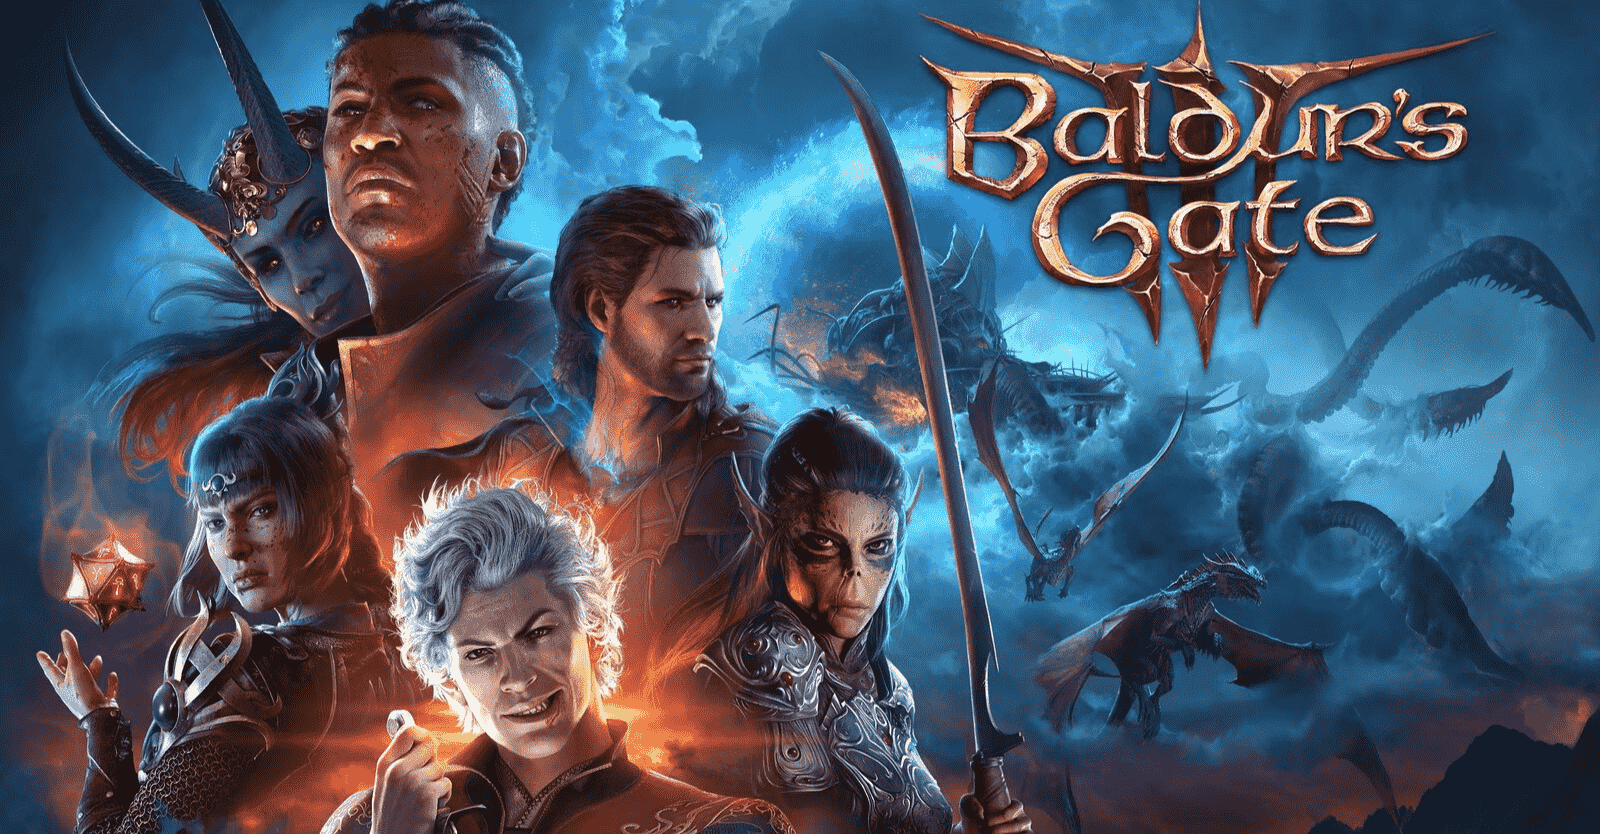 Baldur's Gate 3: How to fix crash issues after patch 5?